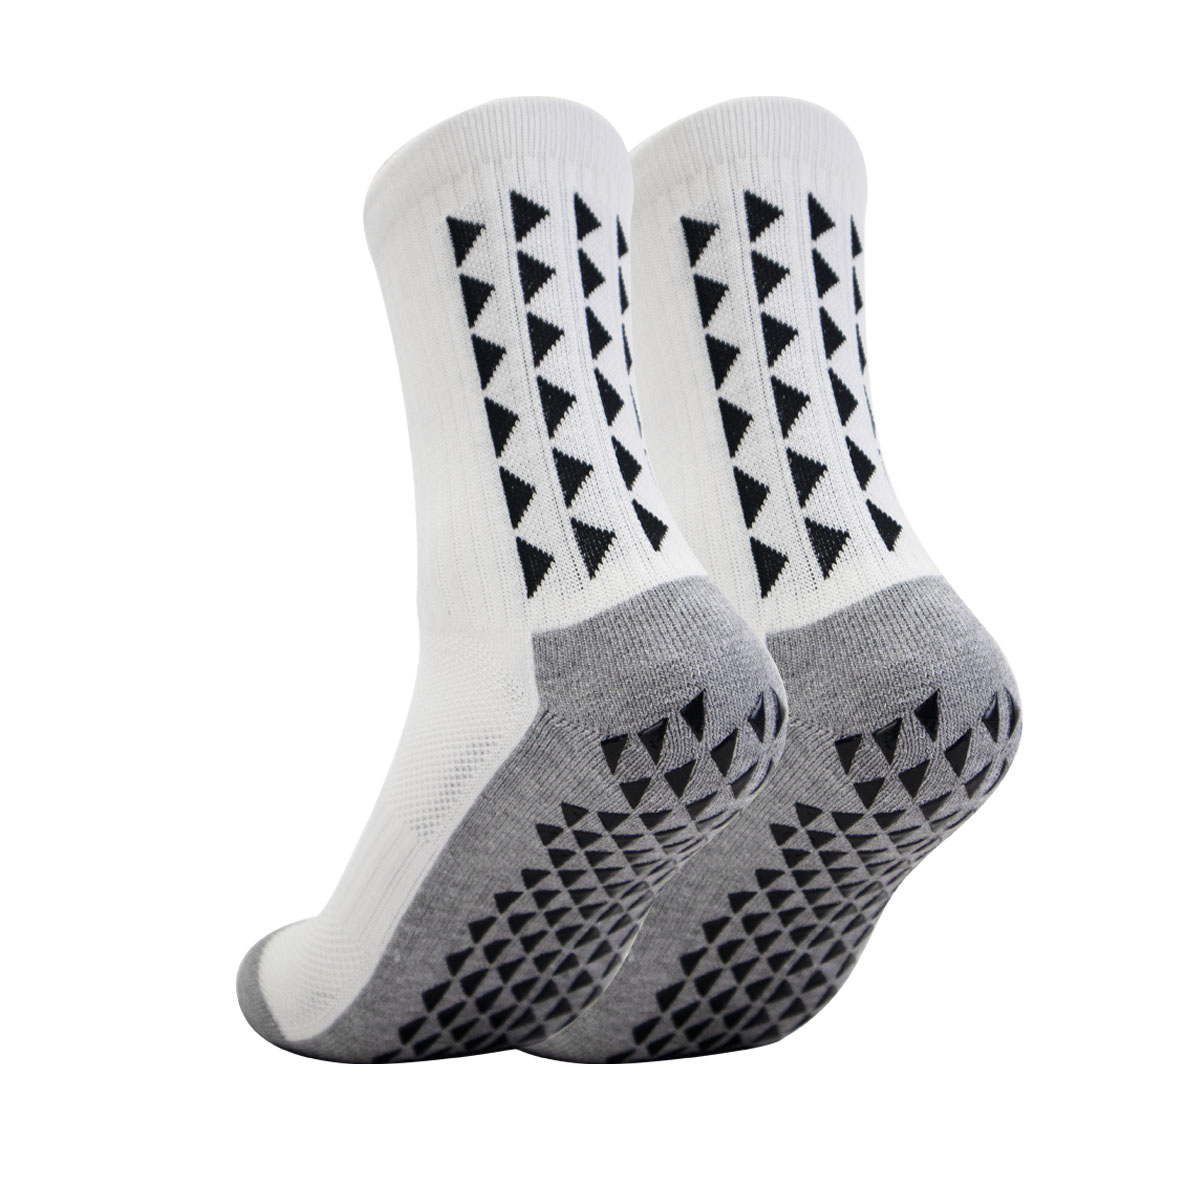 of men's professional football socks non-slip silicone soled outdoor hiking socks